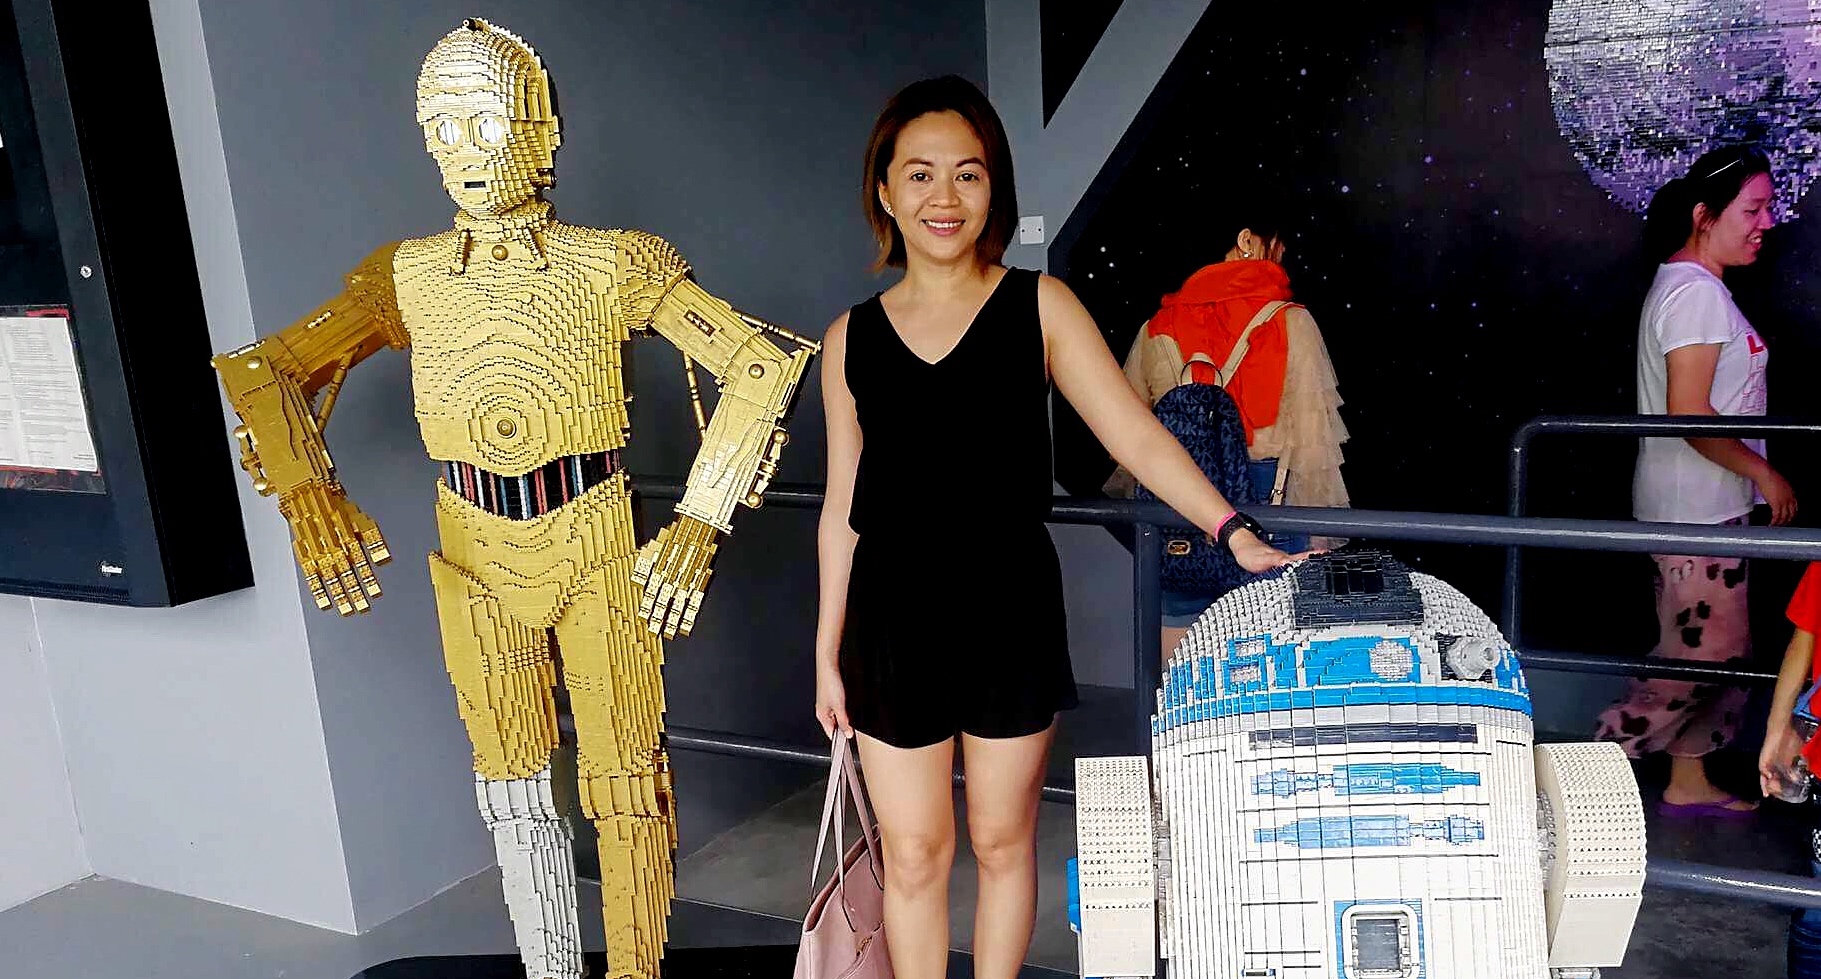 An Adult’s Guide to Legoland, Malaysia